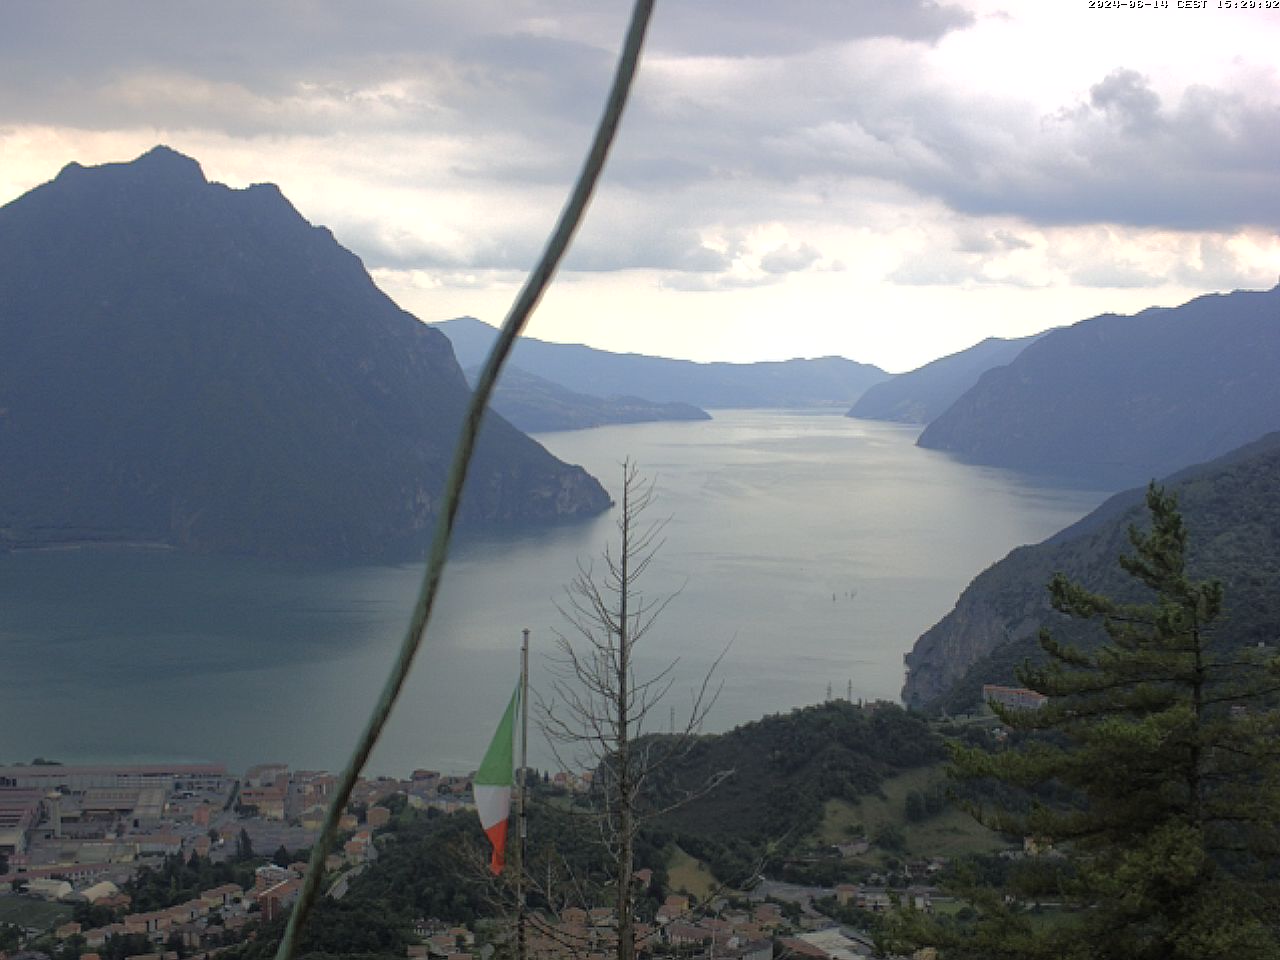 Lovere (Lac d'Iseo) Ma. 15:29